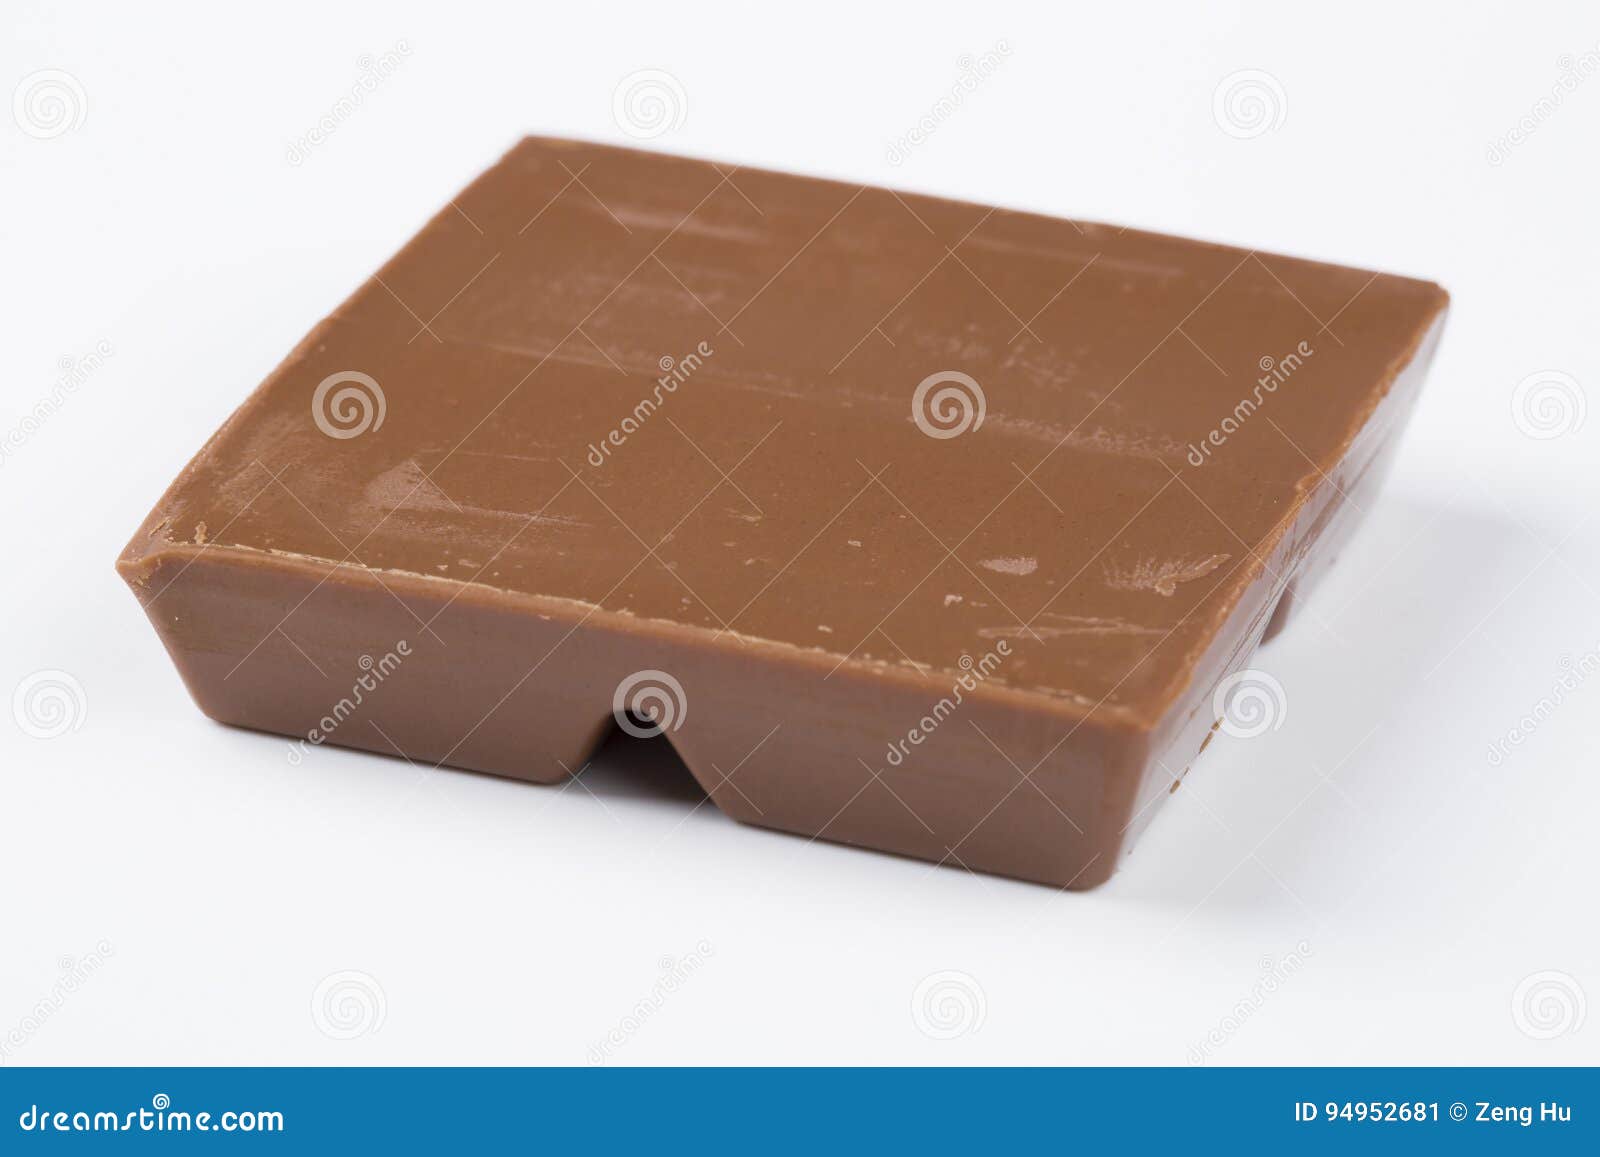 One Piece Of Chocolate Stock Image Image Of Yummy Ingredient